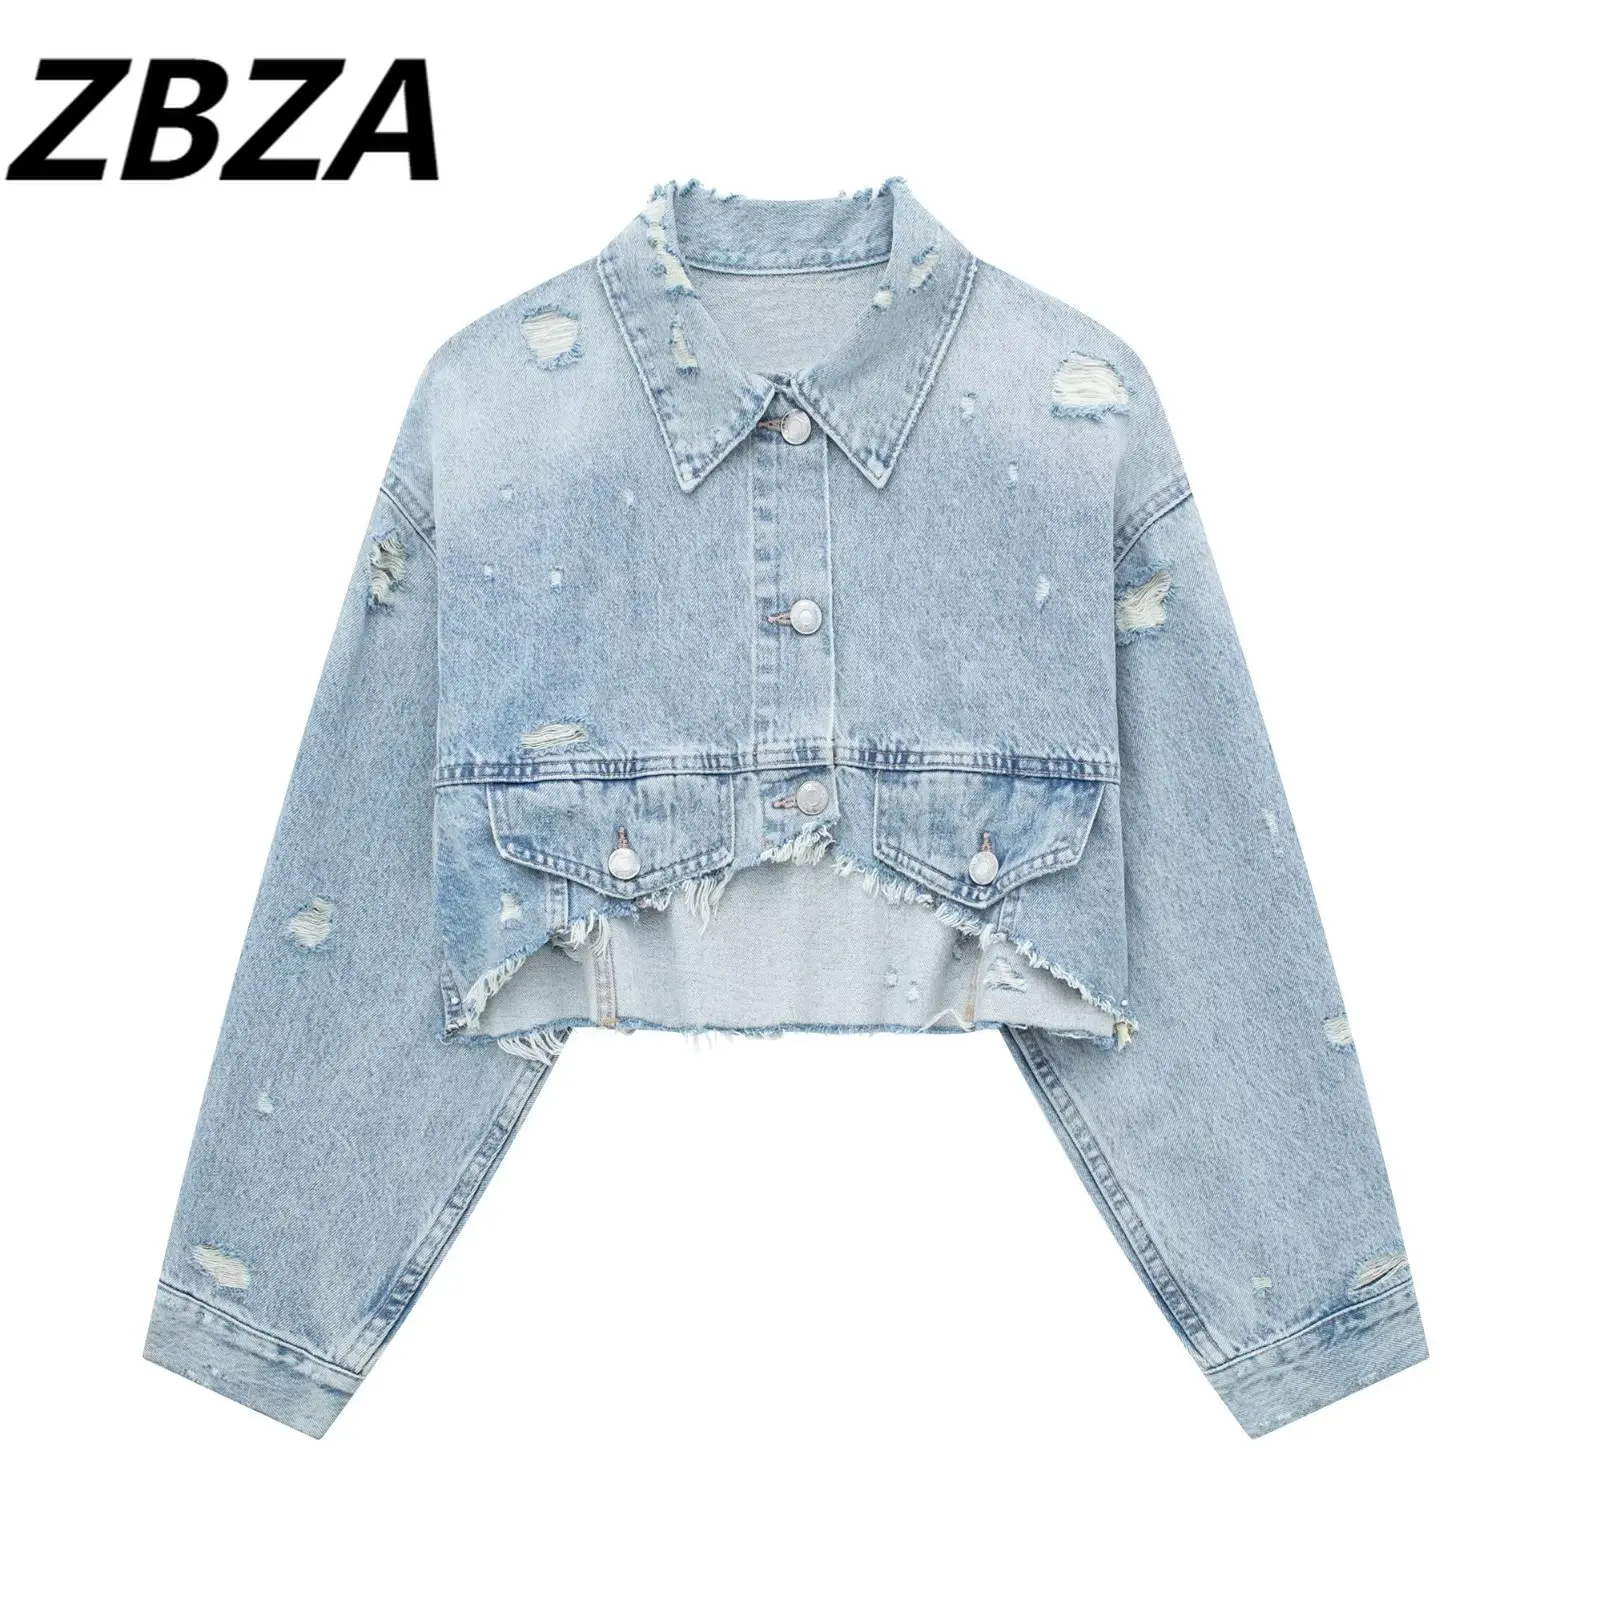 

ZBZA Women 2023 New Fashion Loose Short Jean Jacket Coat Vintage Long Sleeve Button Female Outerwear Chic Overshirt